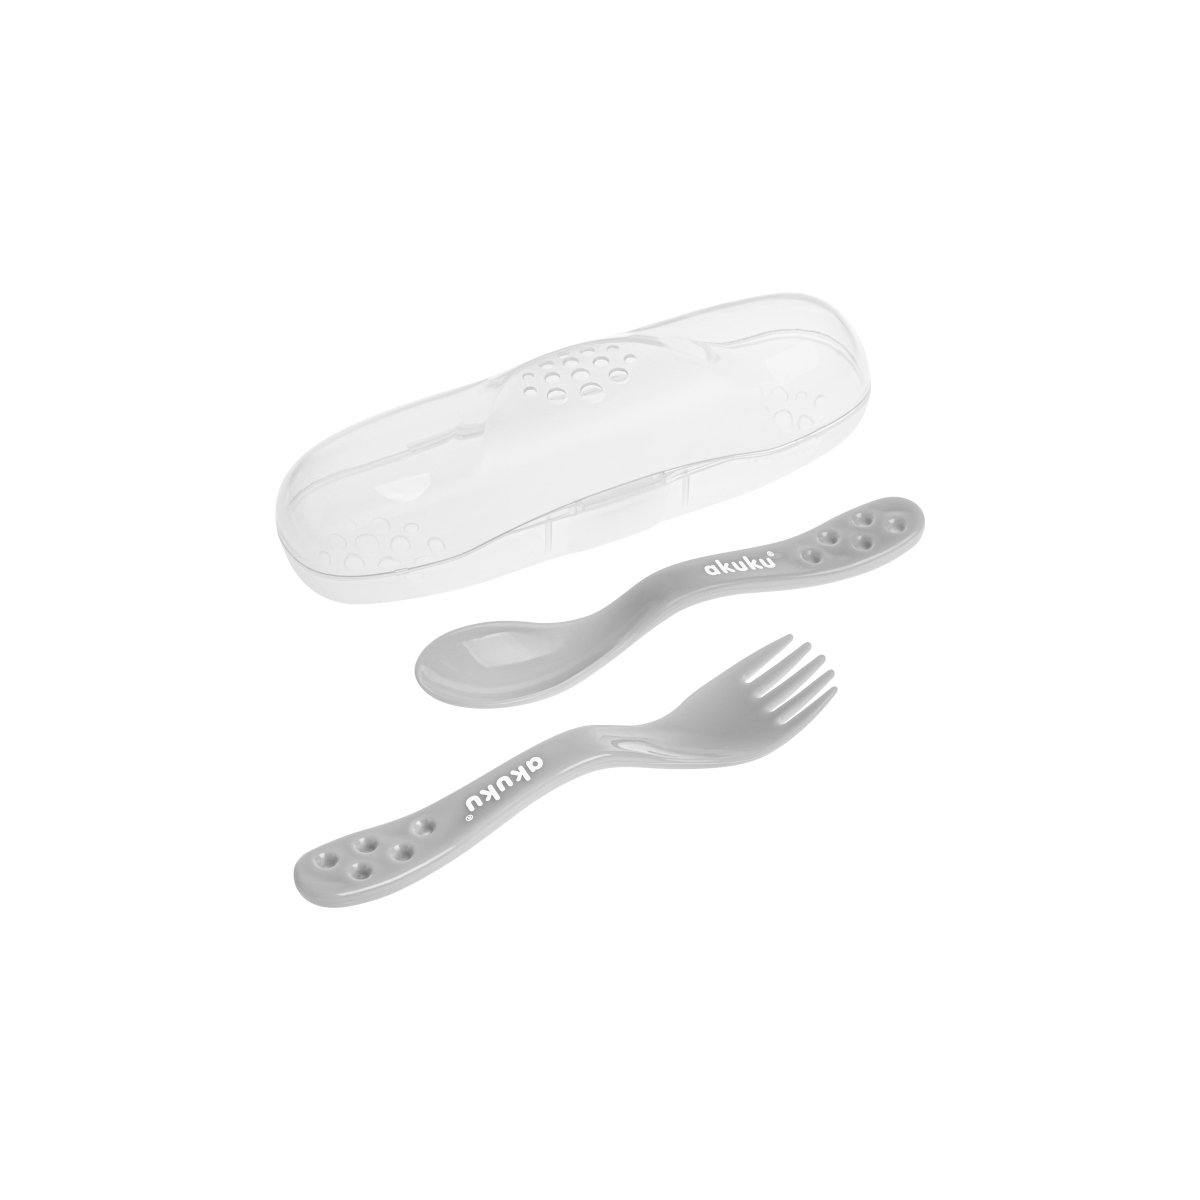 The cutlery set in case, gray A0073